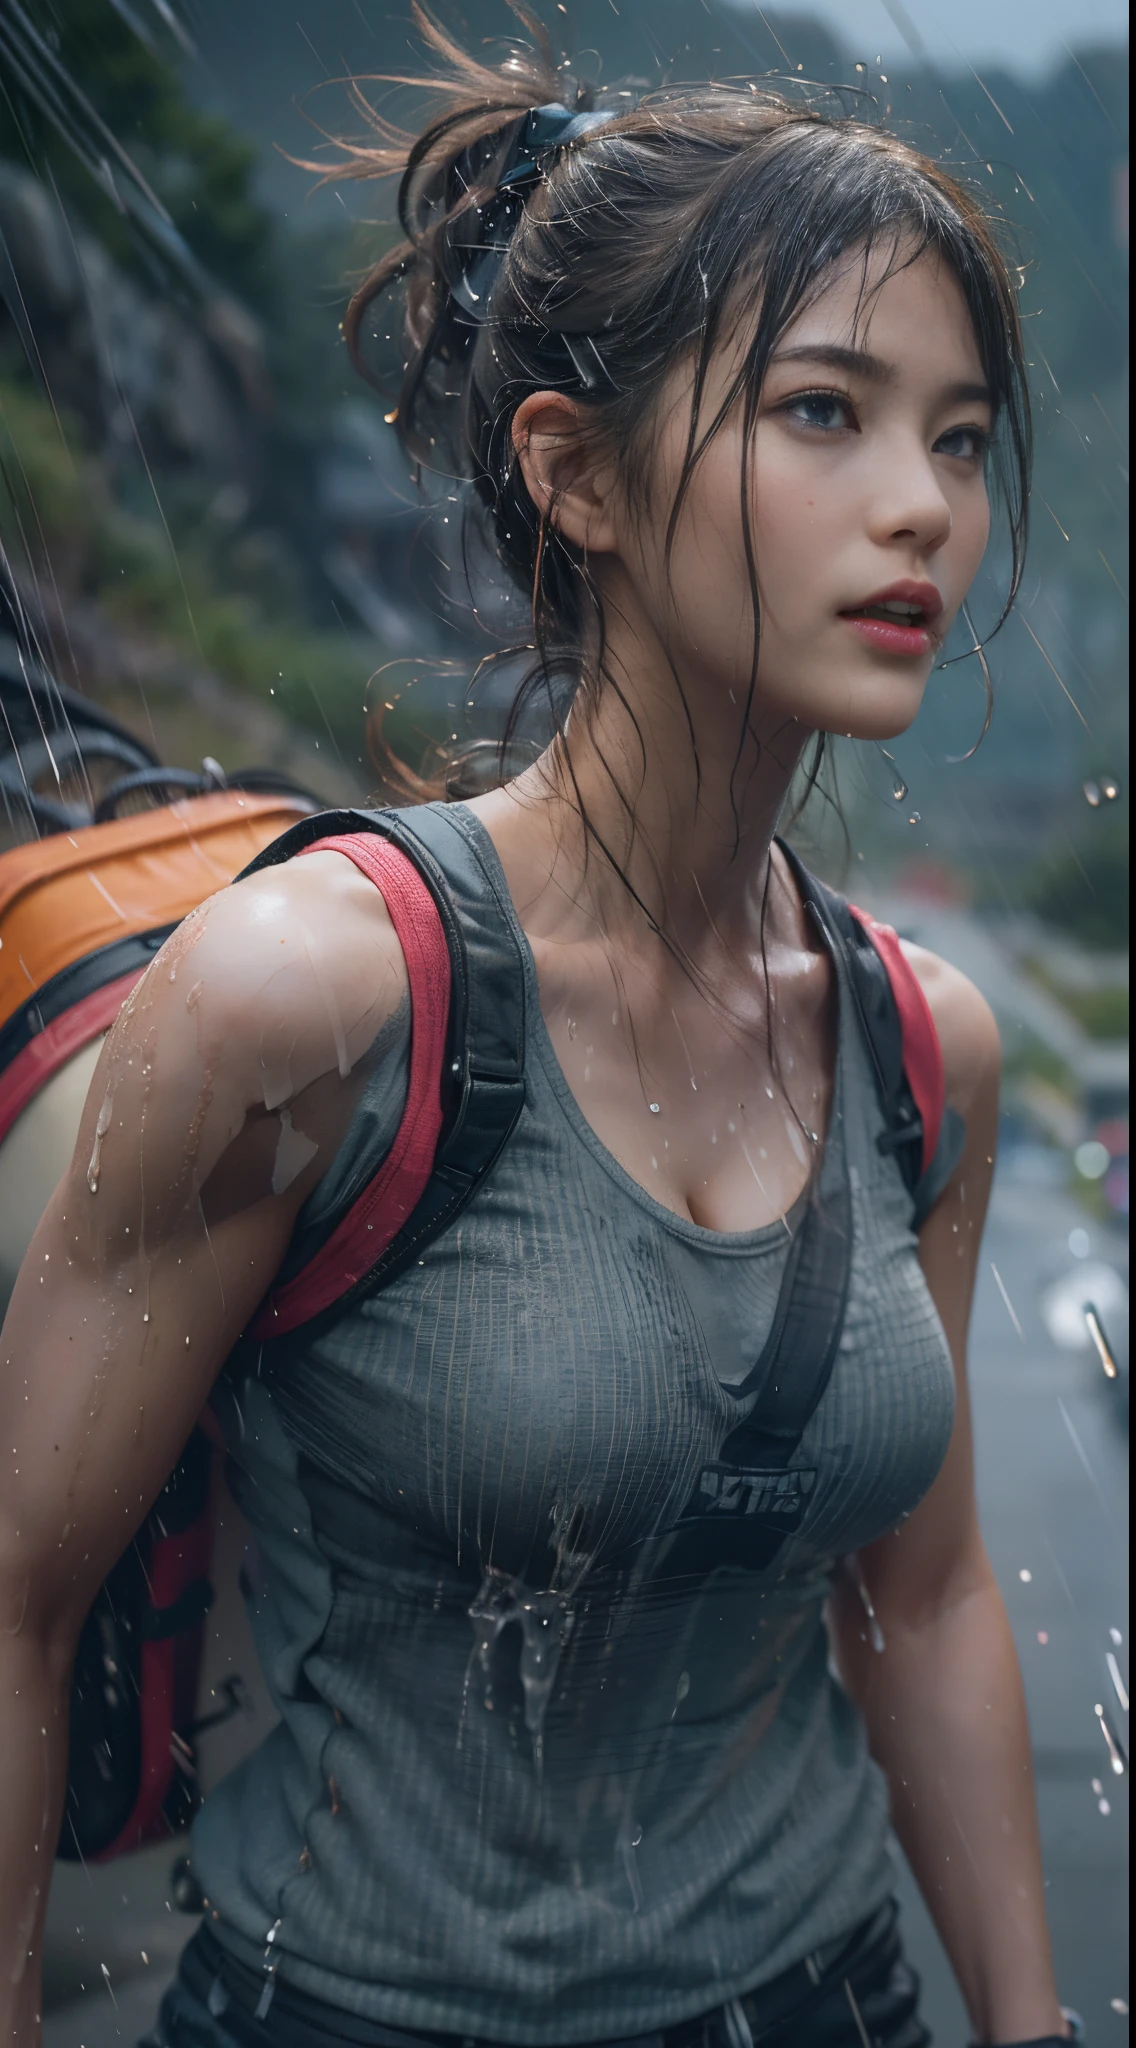 8K, top-quality, （pubic hair beauty）、hight resolution, lifelike, realperson, A beautiful muscular woman is carrying a large amount of luggage with special equipment on her back on a beautiful mountain road in the Alps where it is raining heavily.、((I&#39;m desperately rushing and running as fast as I can))、Hurry、((Fleeing))、He wears tight shorts and a T-shirt that is so short that his stomach is exposed.、(My hair is soaked from the rain)、huge tit、A large amount of raindrops on the cleavage、Death Stranding